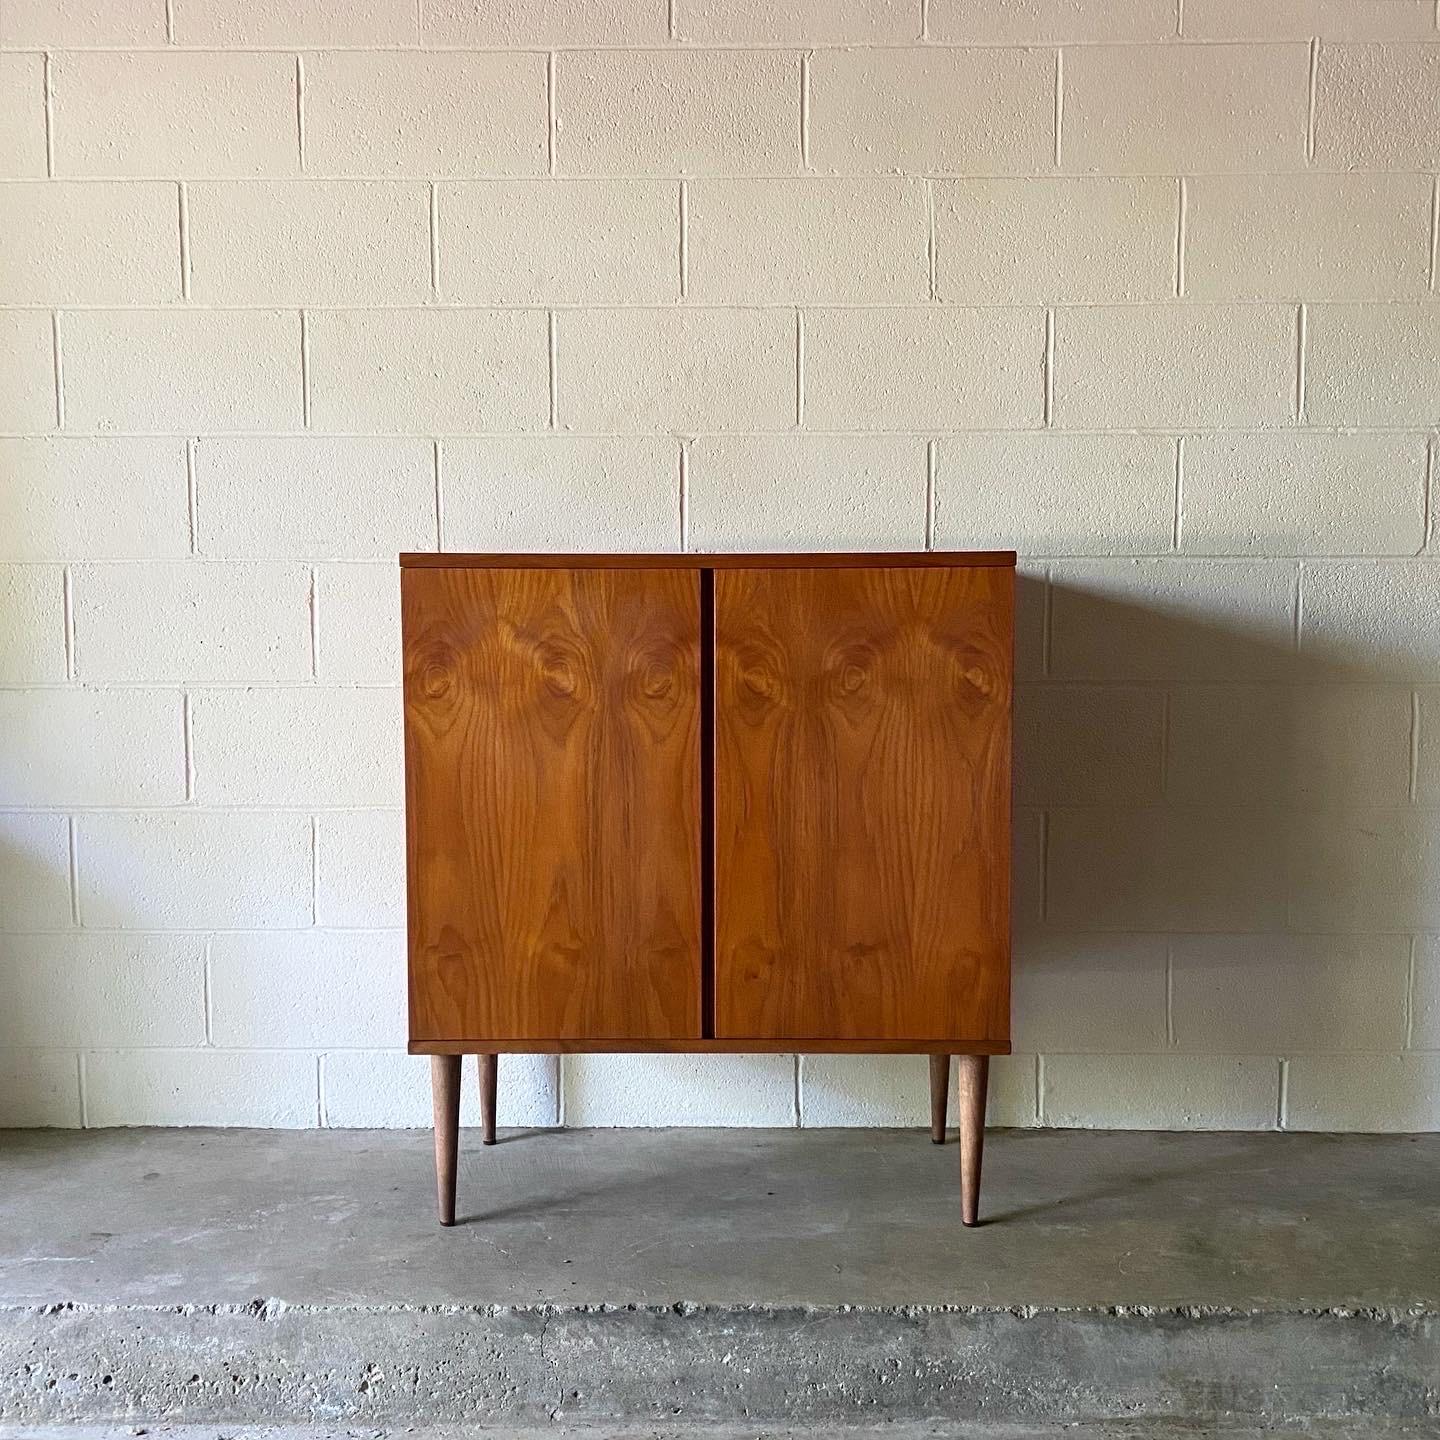 This is a great teak sideboard or bar cabinet designed by Hans Olsen, made in Denmark ca. 1960’s. This beautifully crafted piece displays opposing teak veneers and brass fittings. Doors swing open to reveal an adjustable shelf. Perfect for an